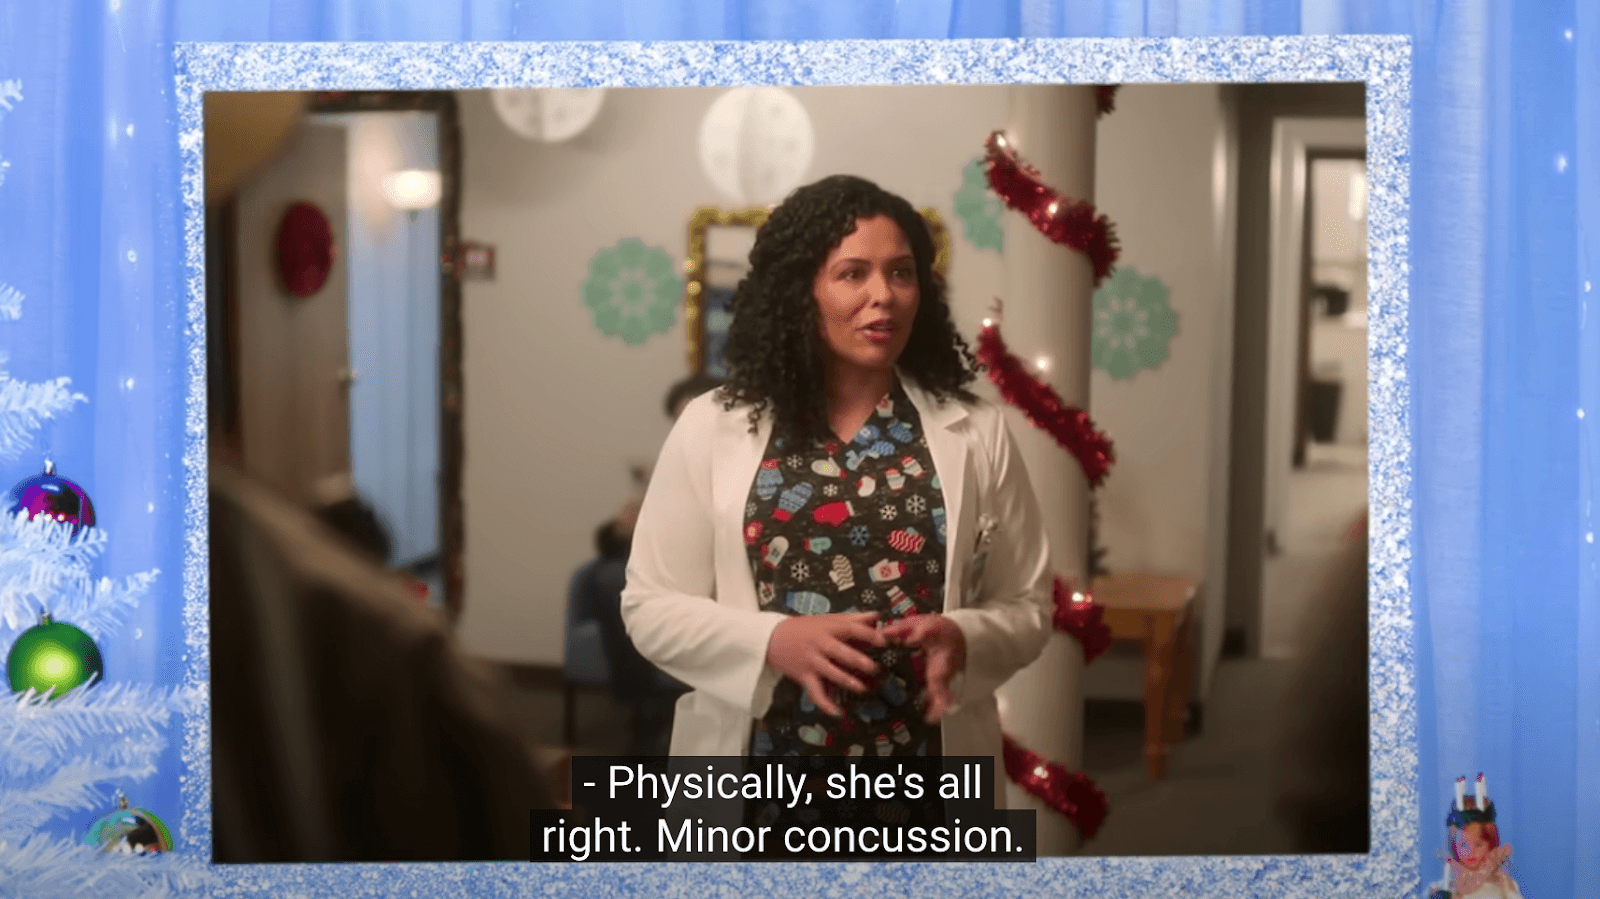 Screenshot from 'I like to watch" Youtube series showing woman with the subtitles "Physically, she's all right. Minor concussion." 